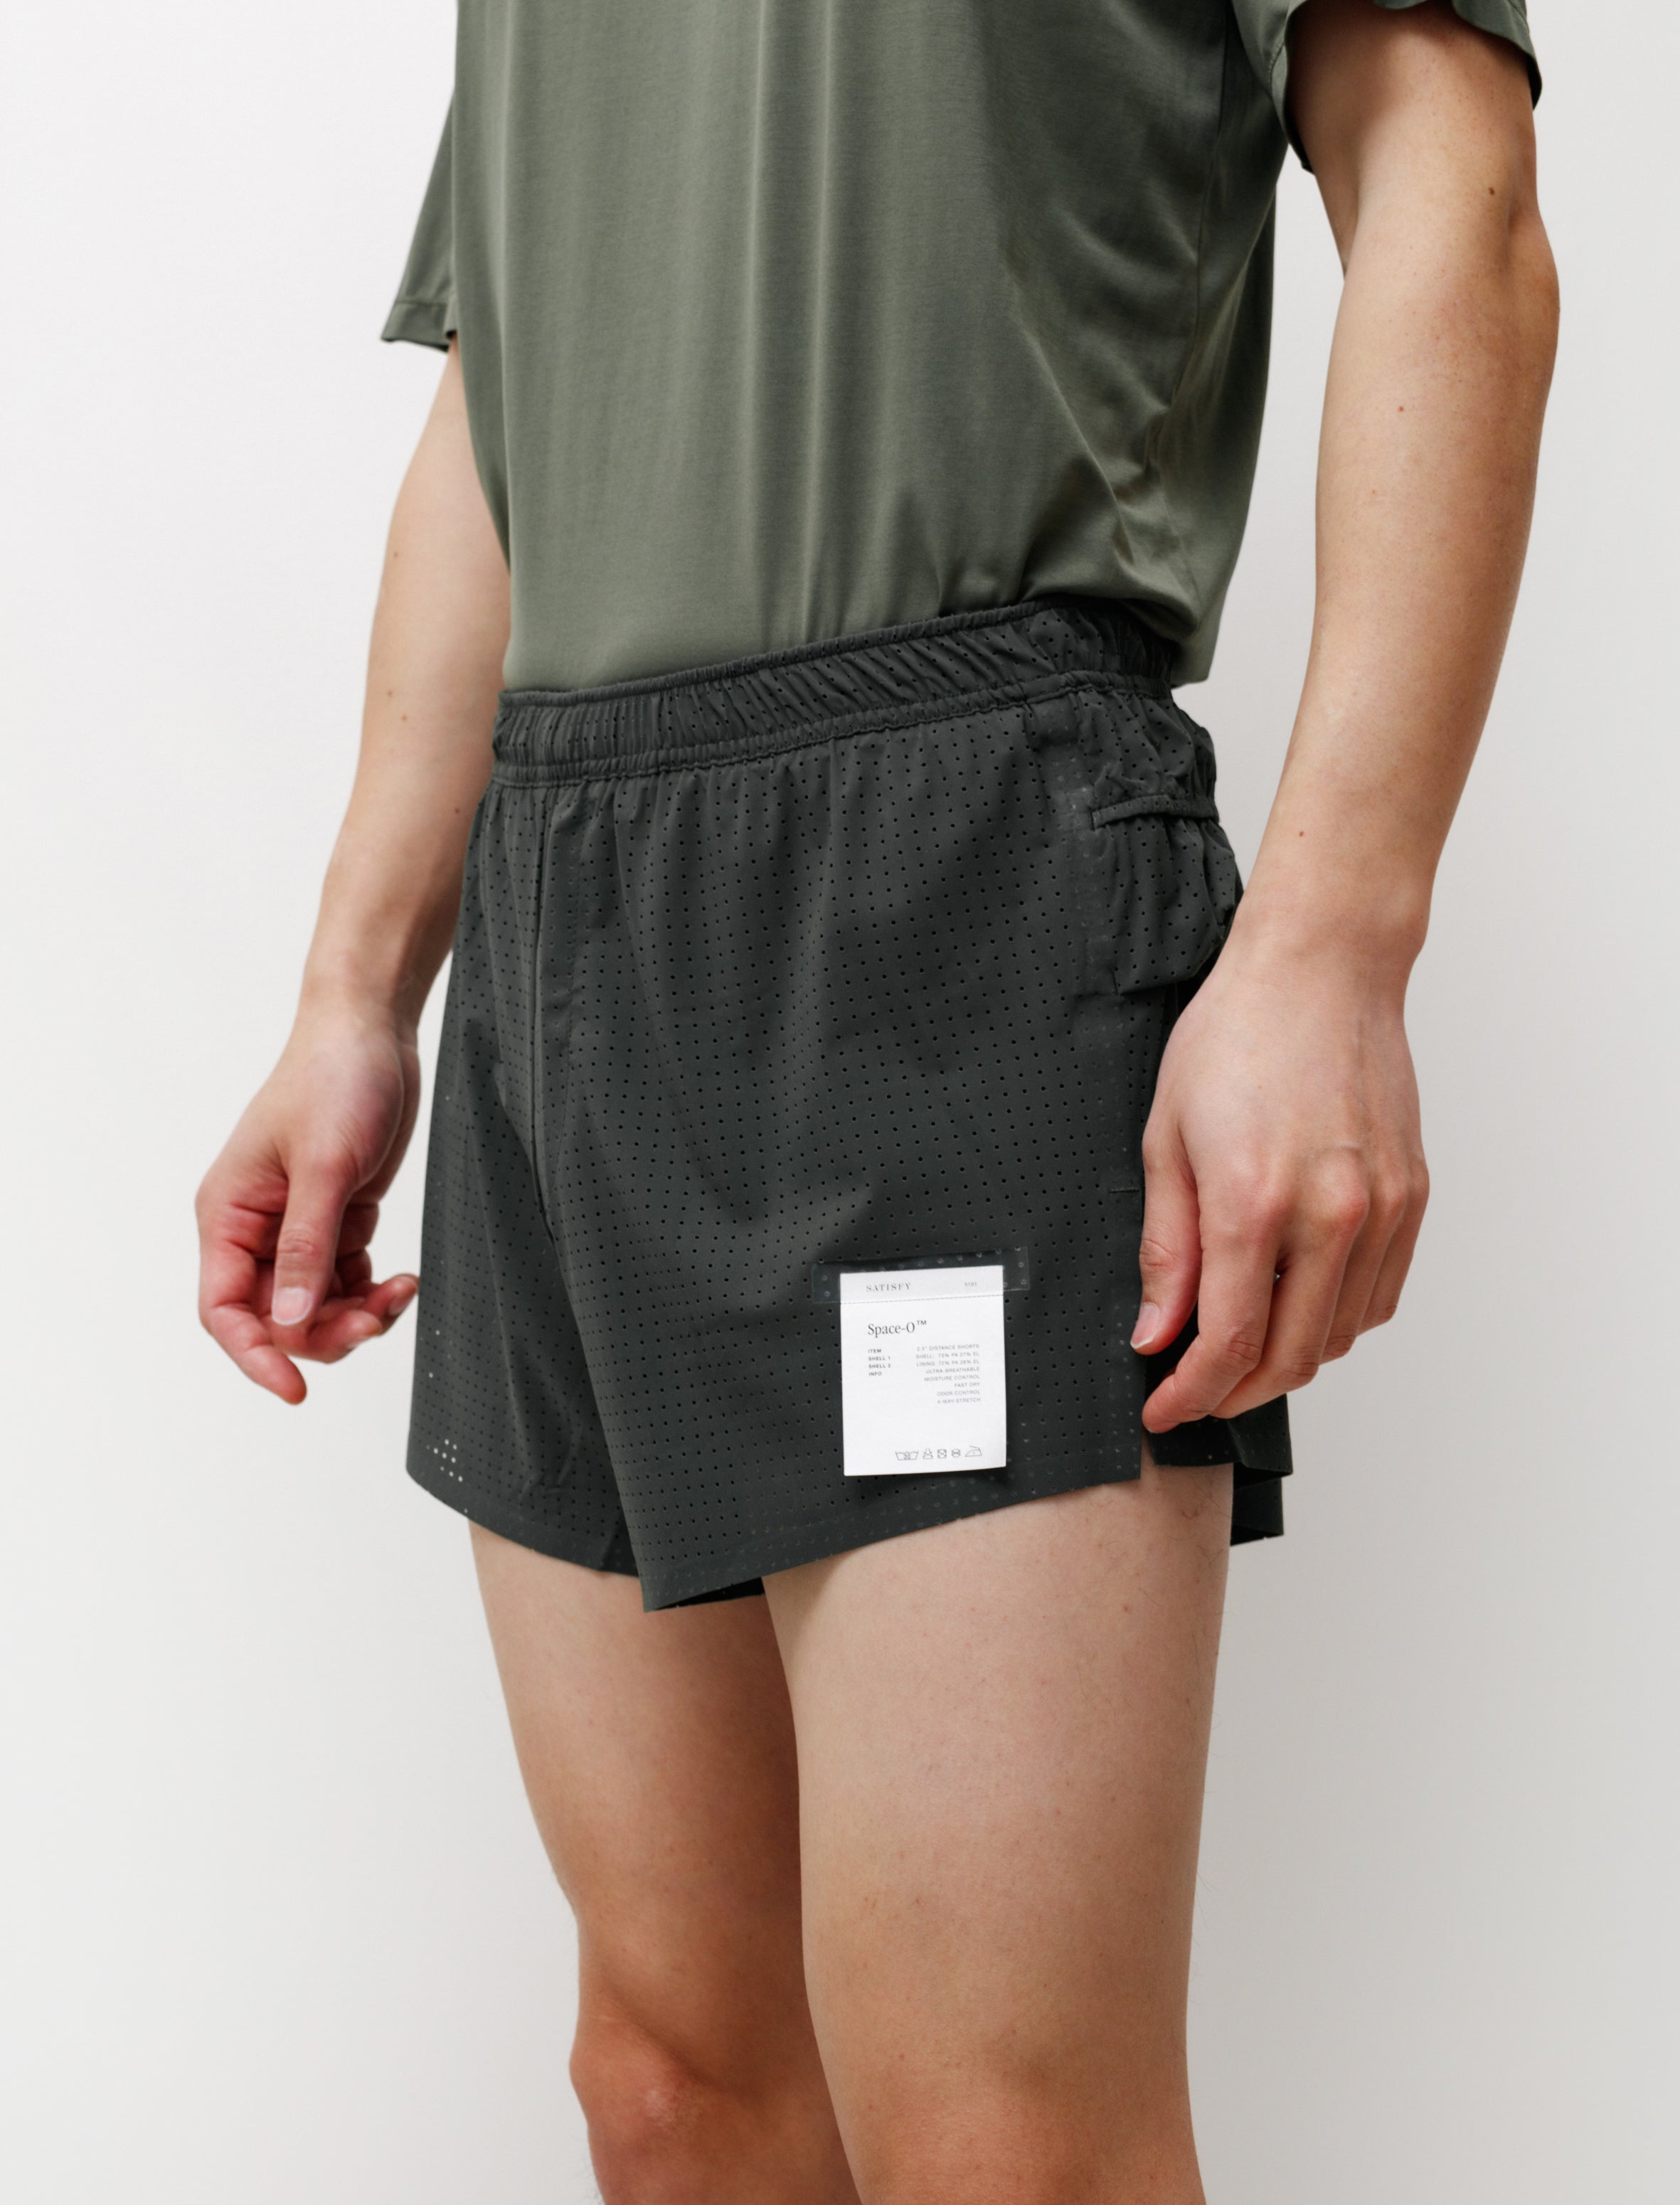 Our Legacy - Running Shorts Dark Brown Ripstop